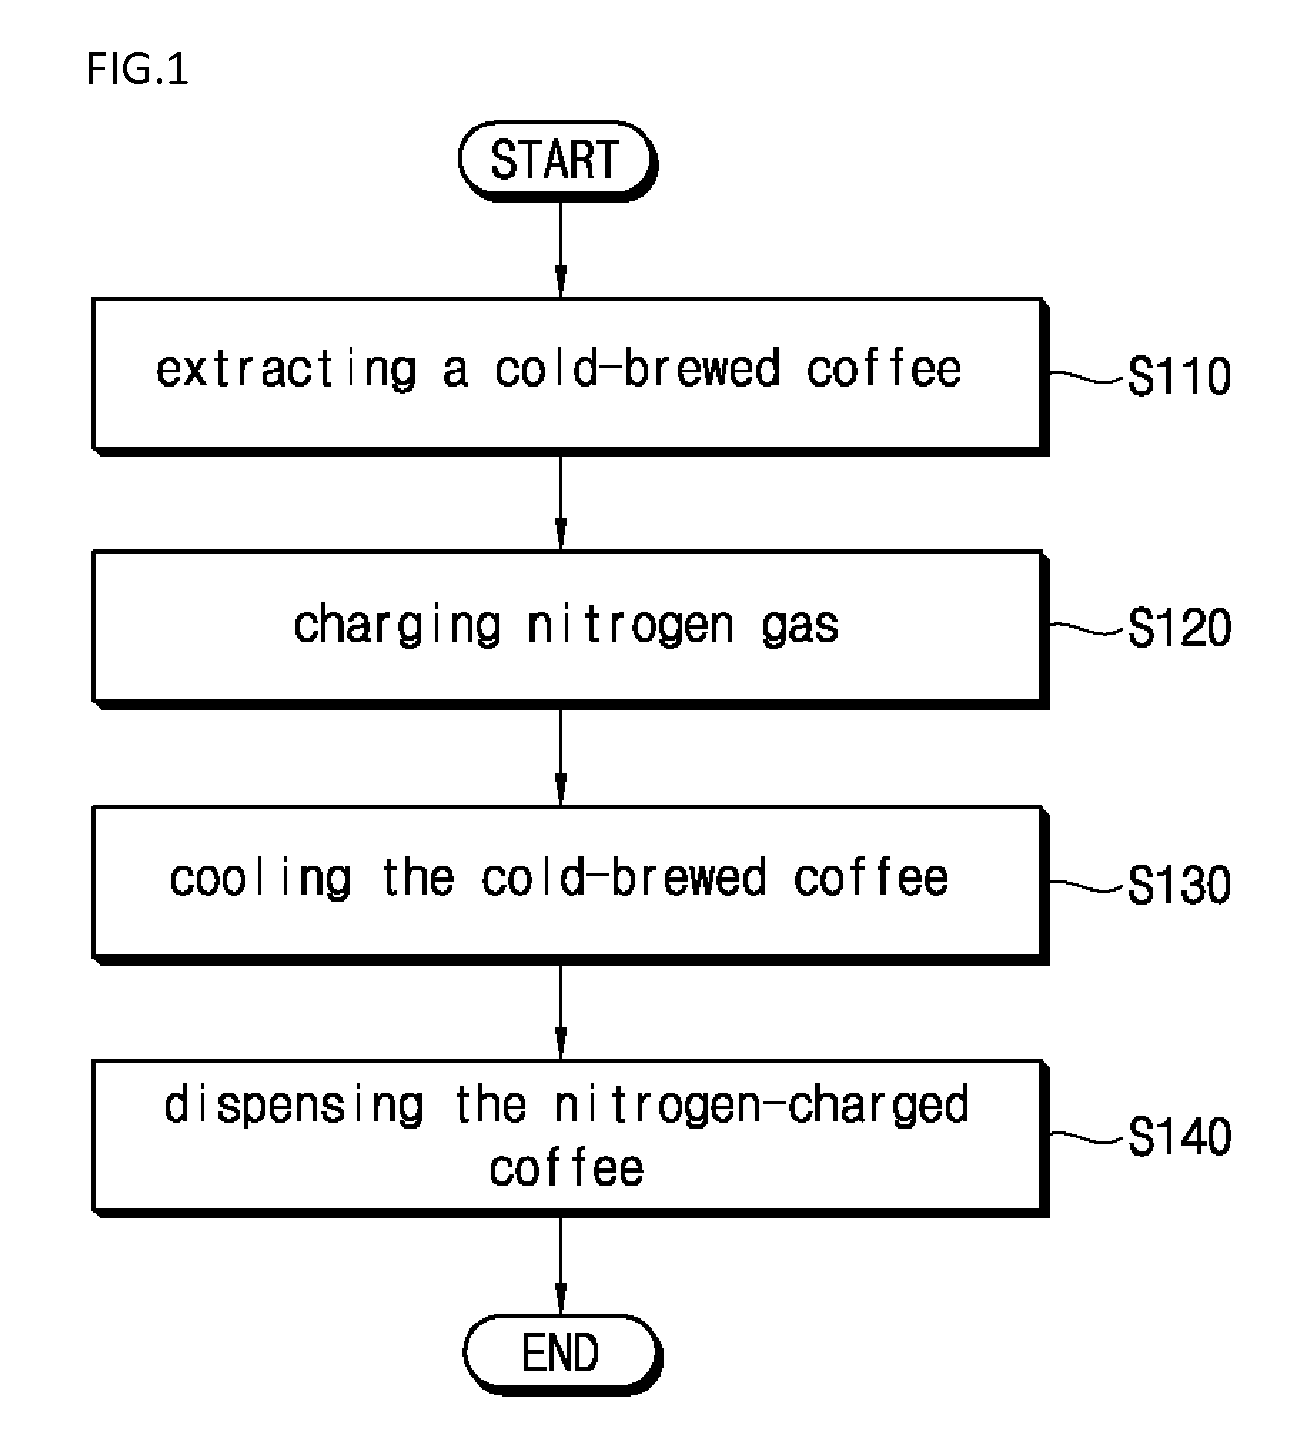 Method of making and dispensing nitrogen-charged coffee